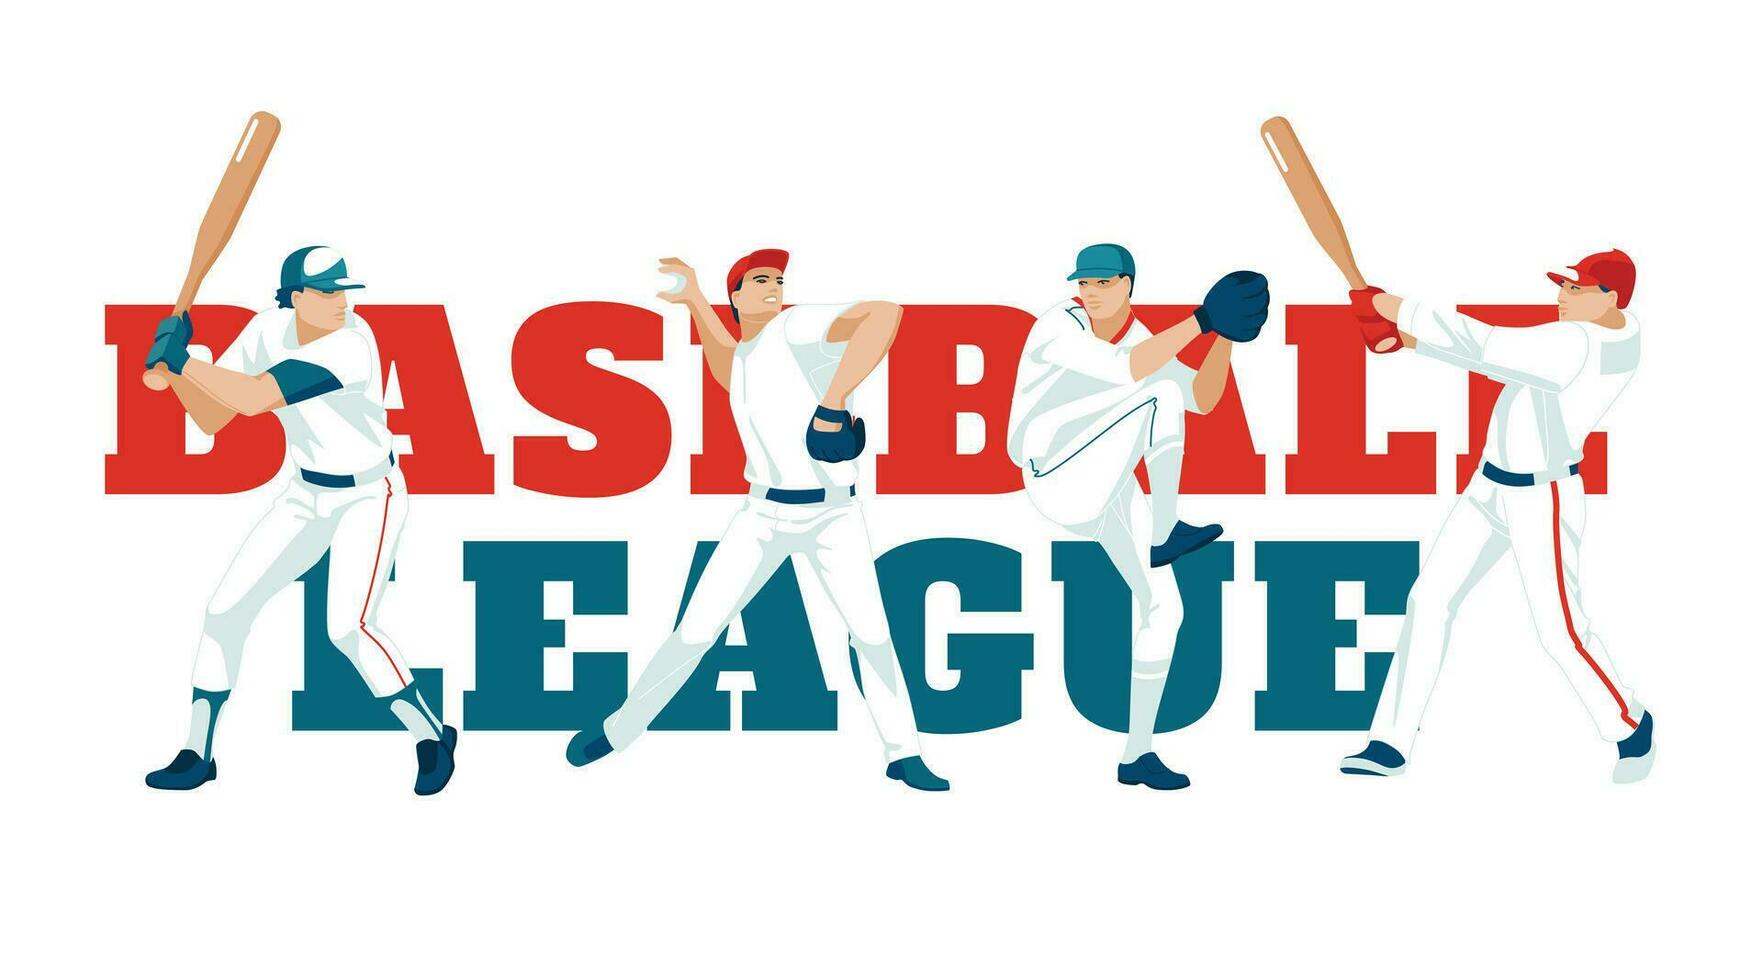 Baseball players in sports uniforms in various poses on the background of large text. Advertisement of matches, competitions, sports clubs. Vector flat illustration